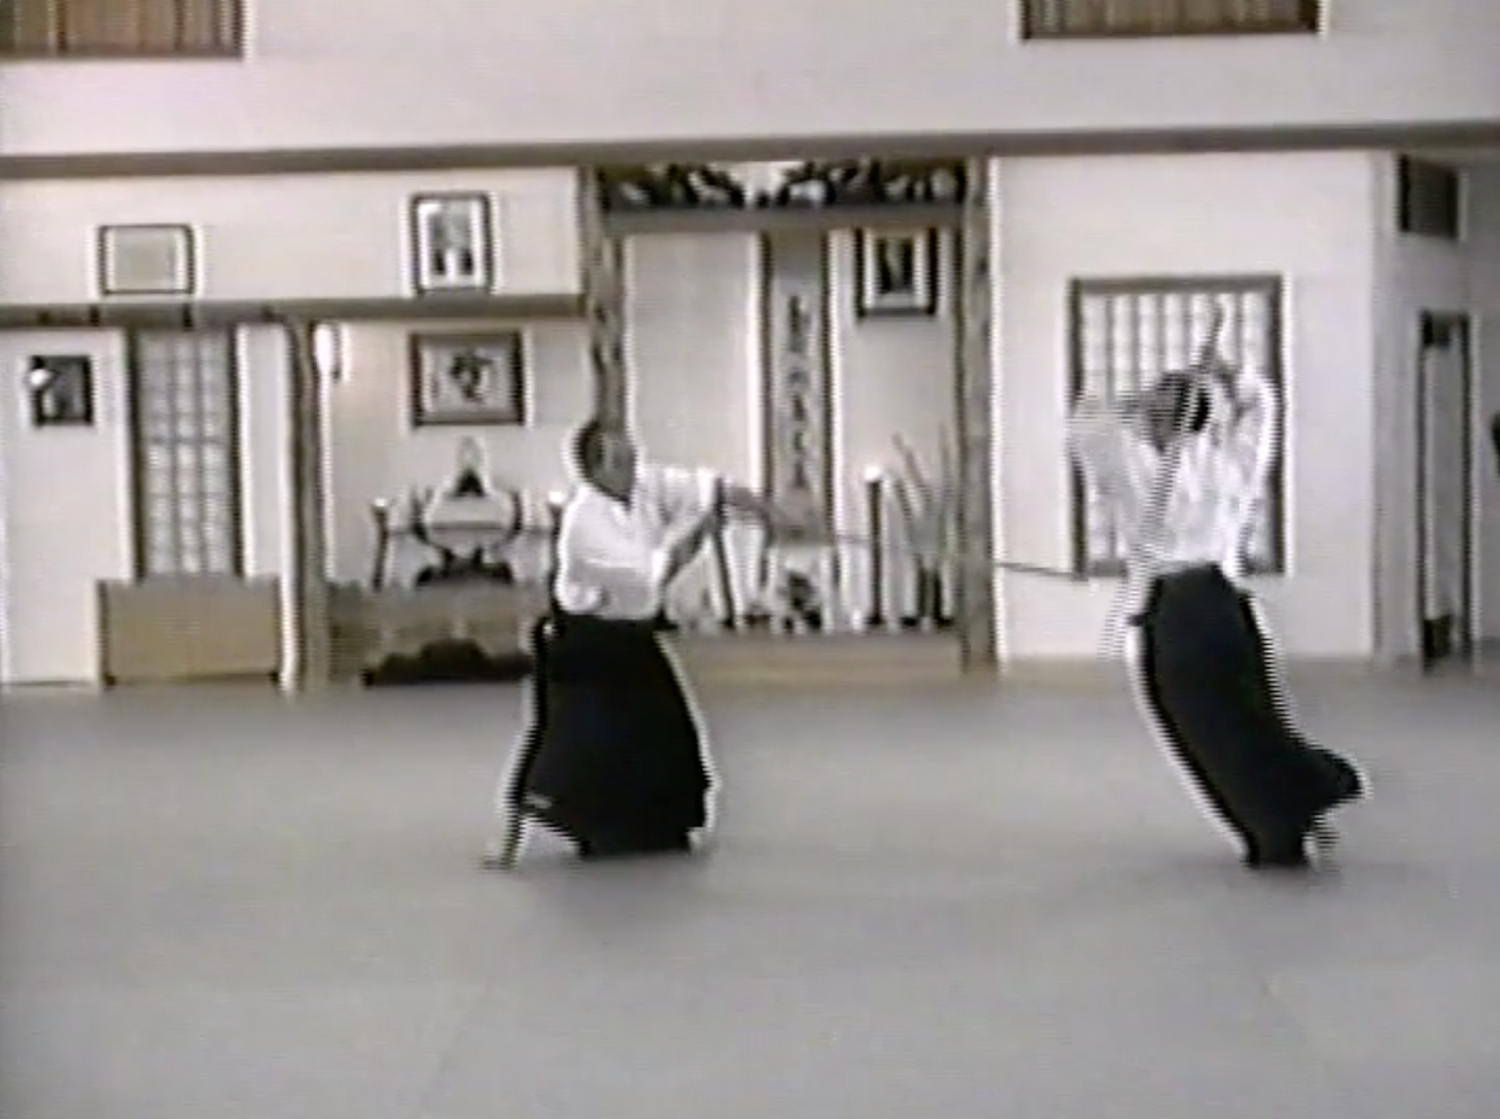 Aikido Technical Guidelines 4 DVD Set by TK Chiba  (Preowned) - Budovideos